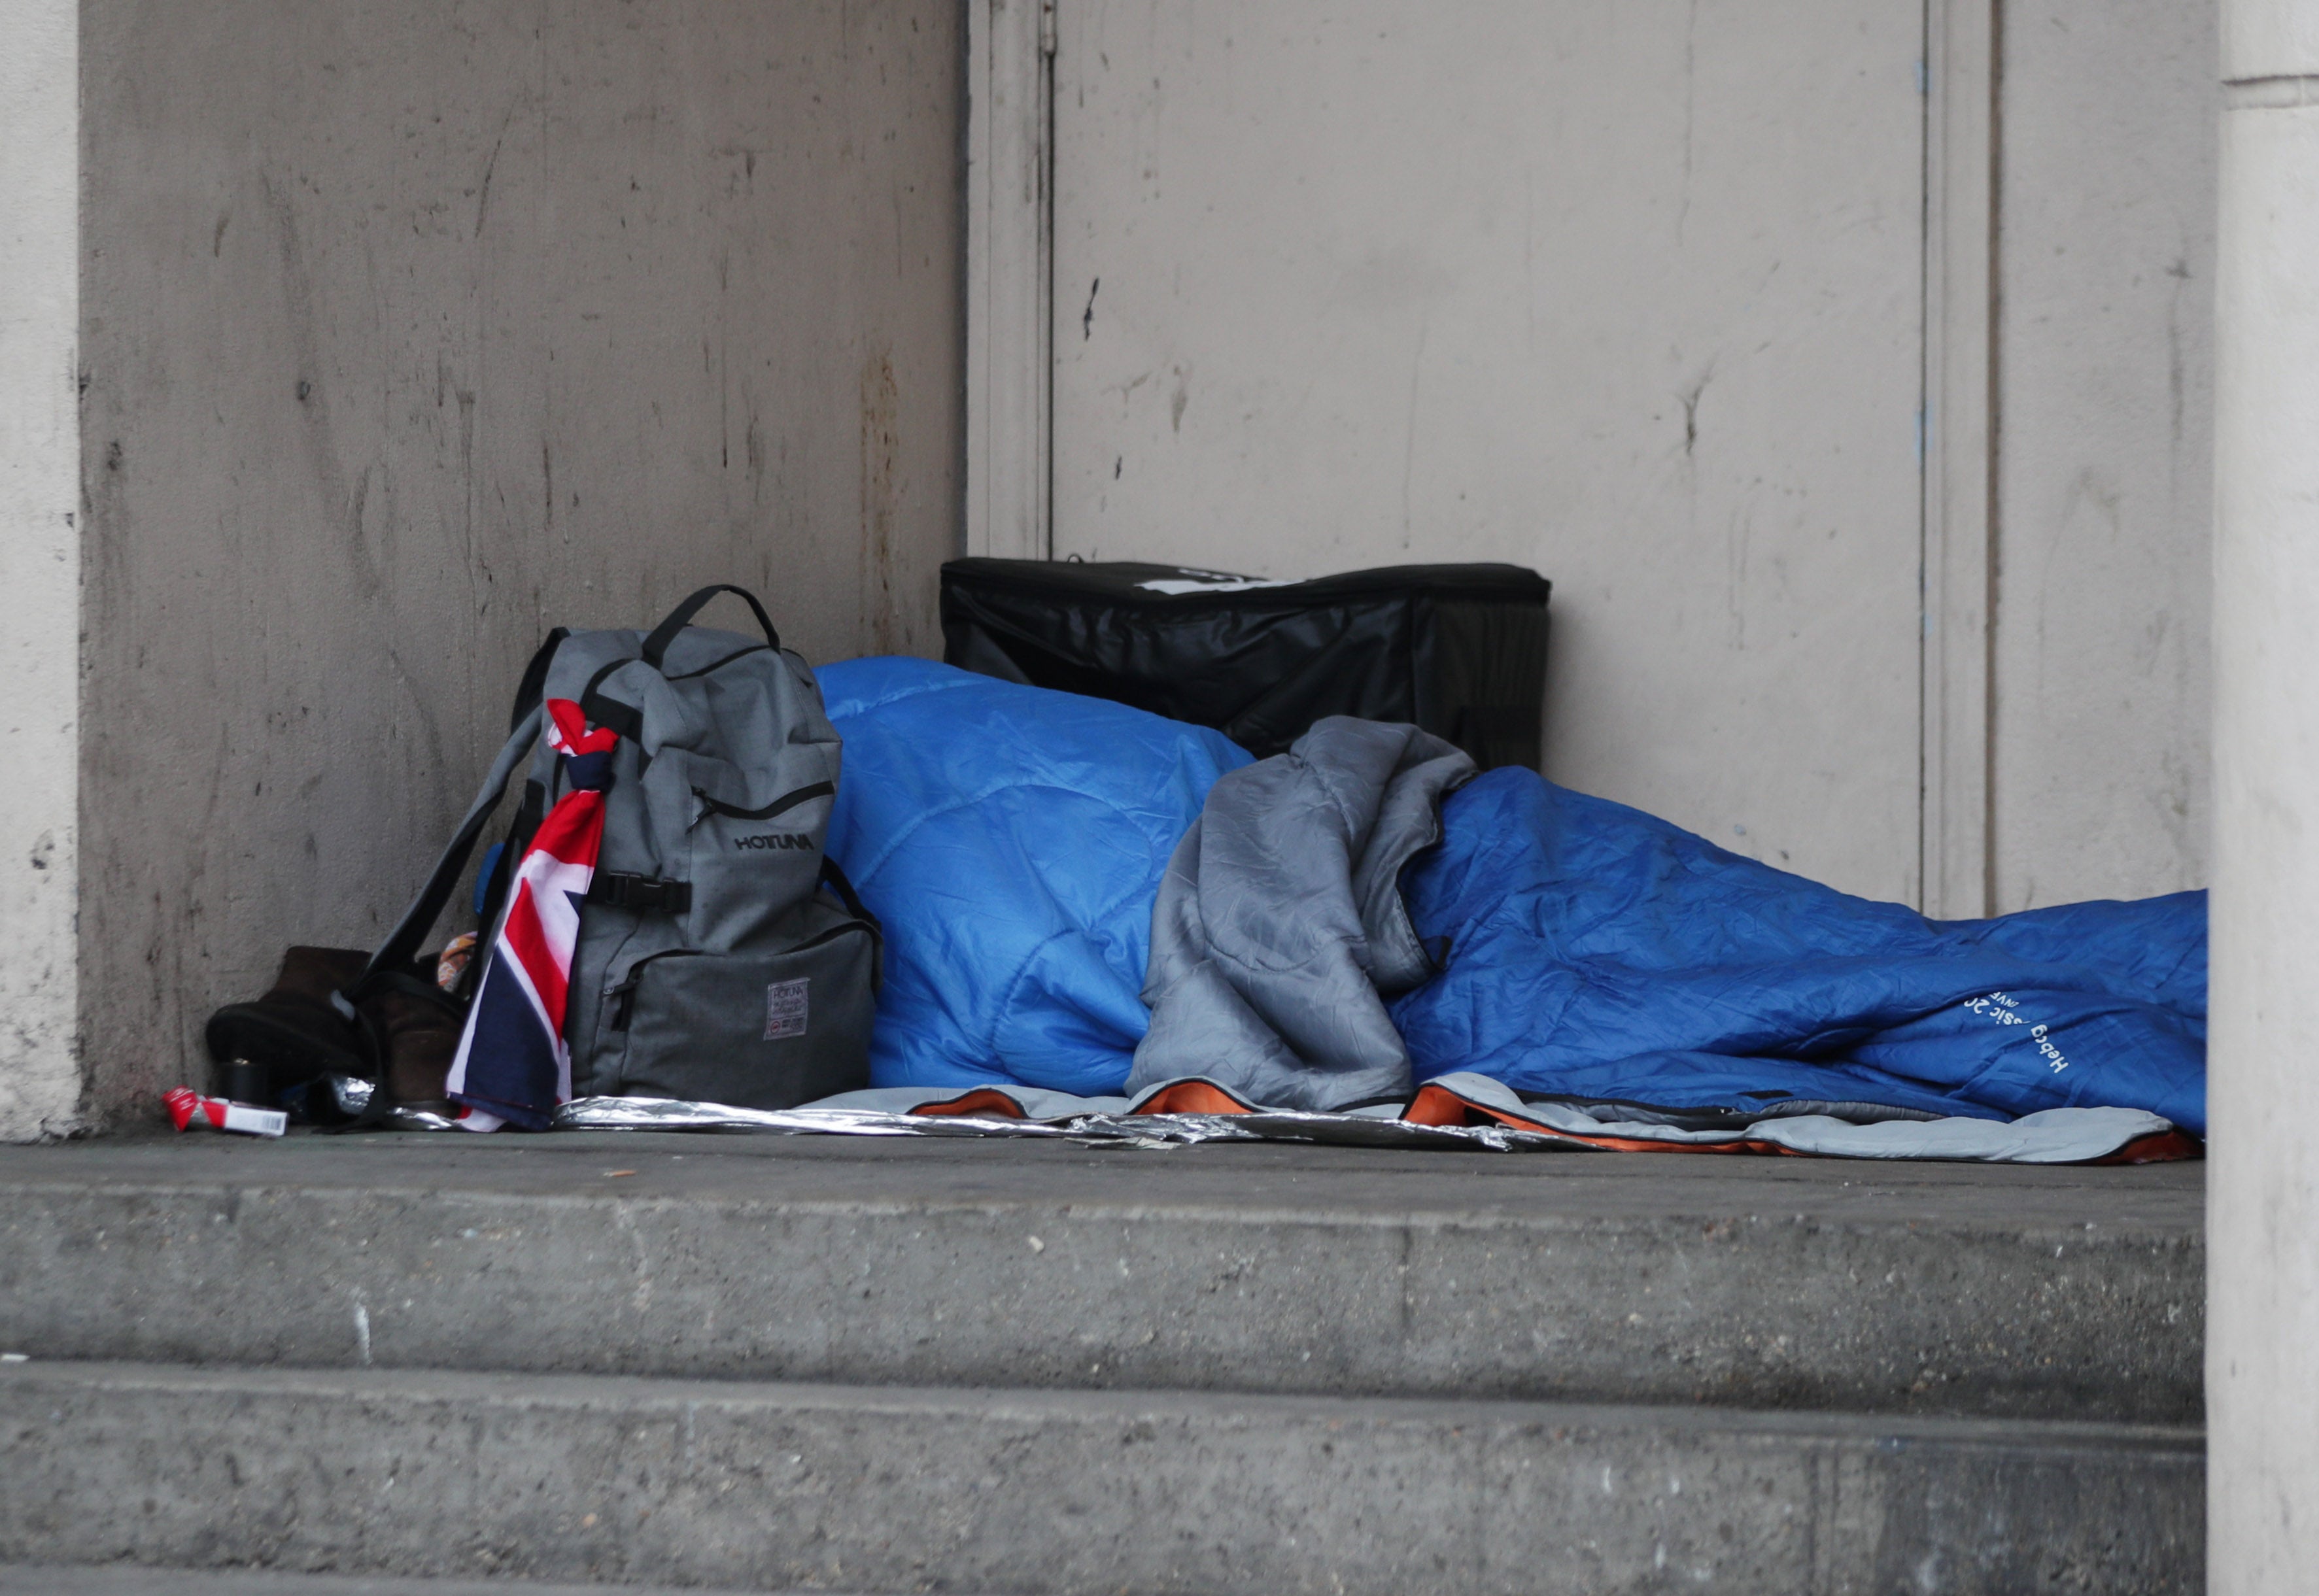 Rough sleeping has more than doubled since 2010